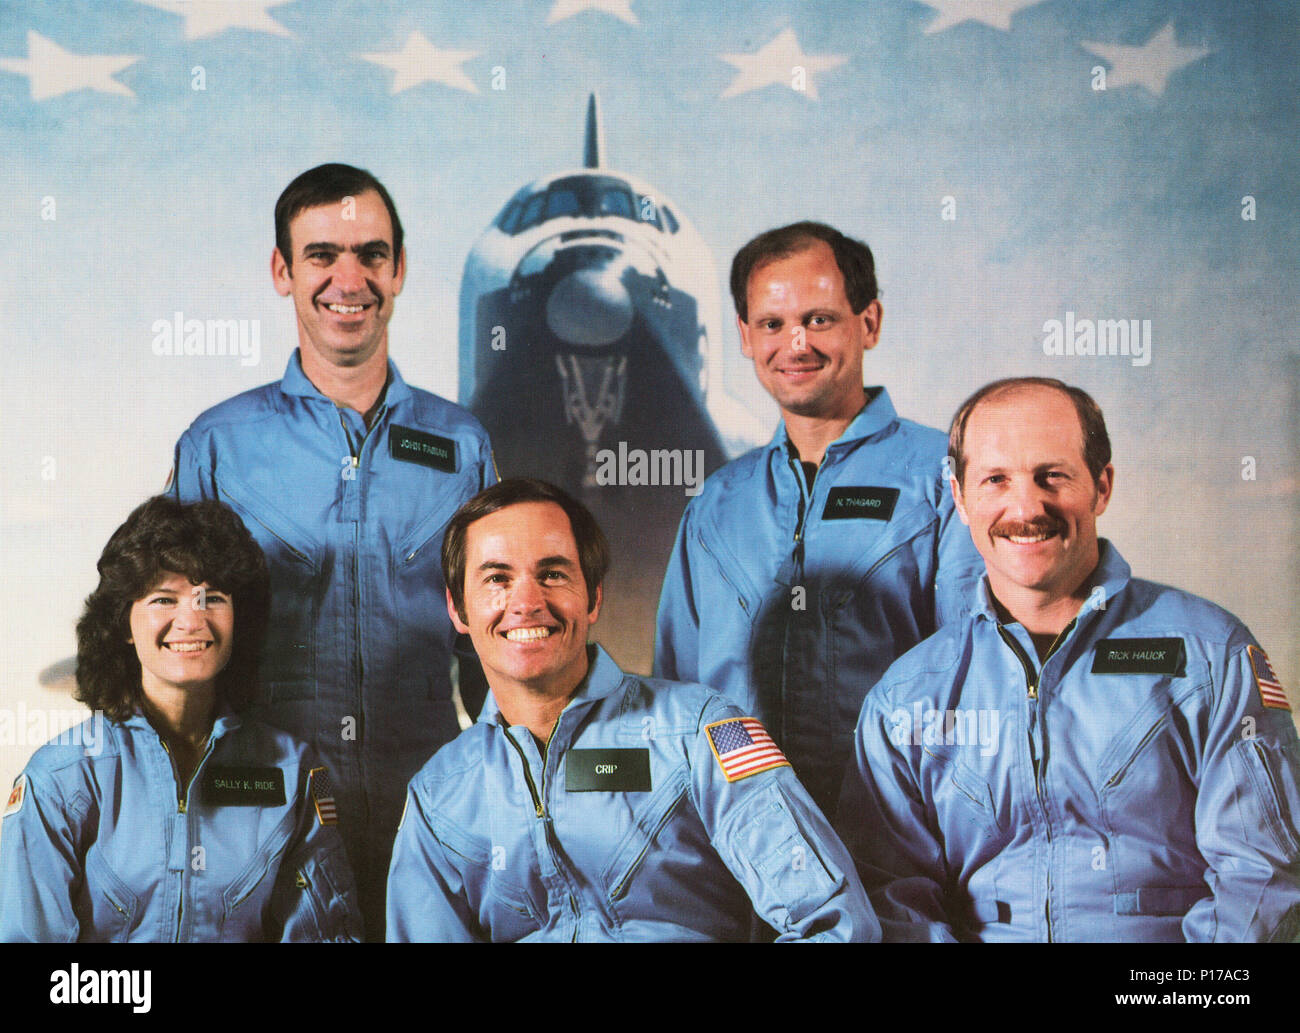 Astronauts of the STS-7/Challenger mission are left to right first row: Sally K. Ride (mission specialist), Robert L. Crippen (commander), Frederick H. Hauck (pilot); rear row: John M. Fabian (left) and Norman E. Thagard (mission specialists). STS-7 launched the first five-member crew and the first American female astronaut into space on June 18, 1983. Stock Photo